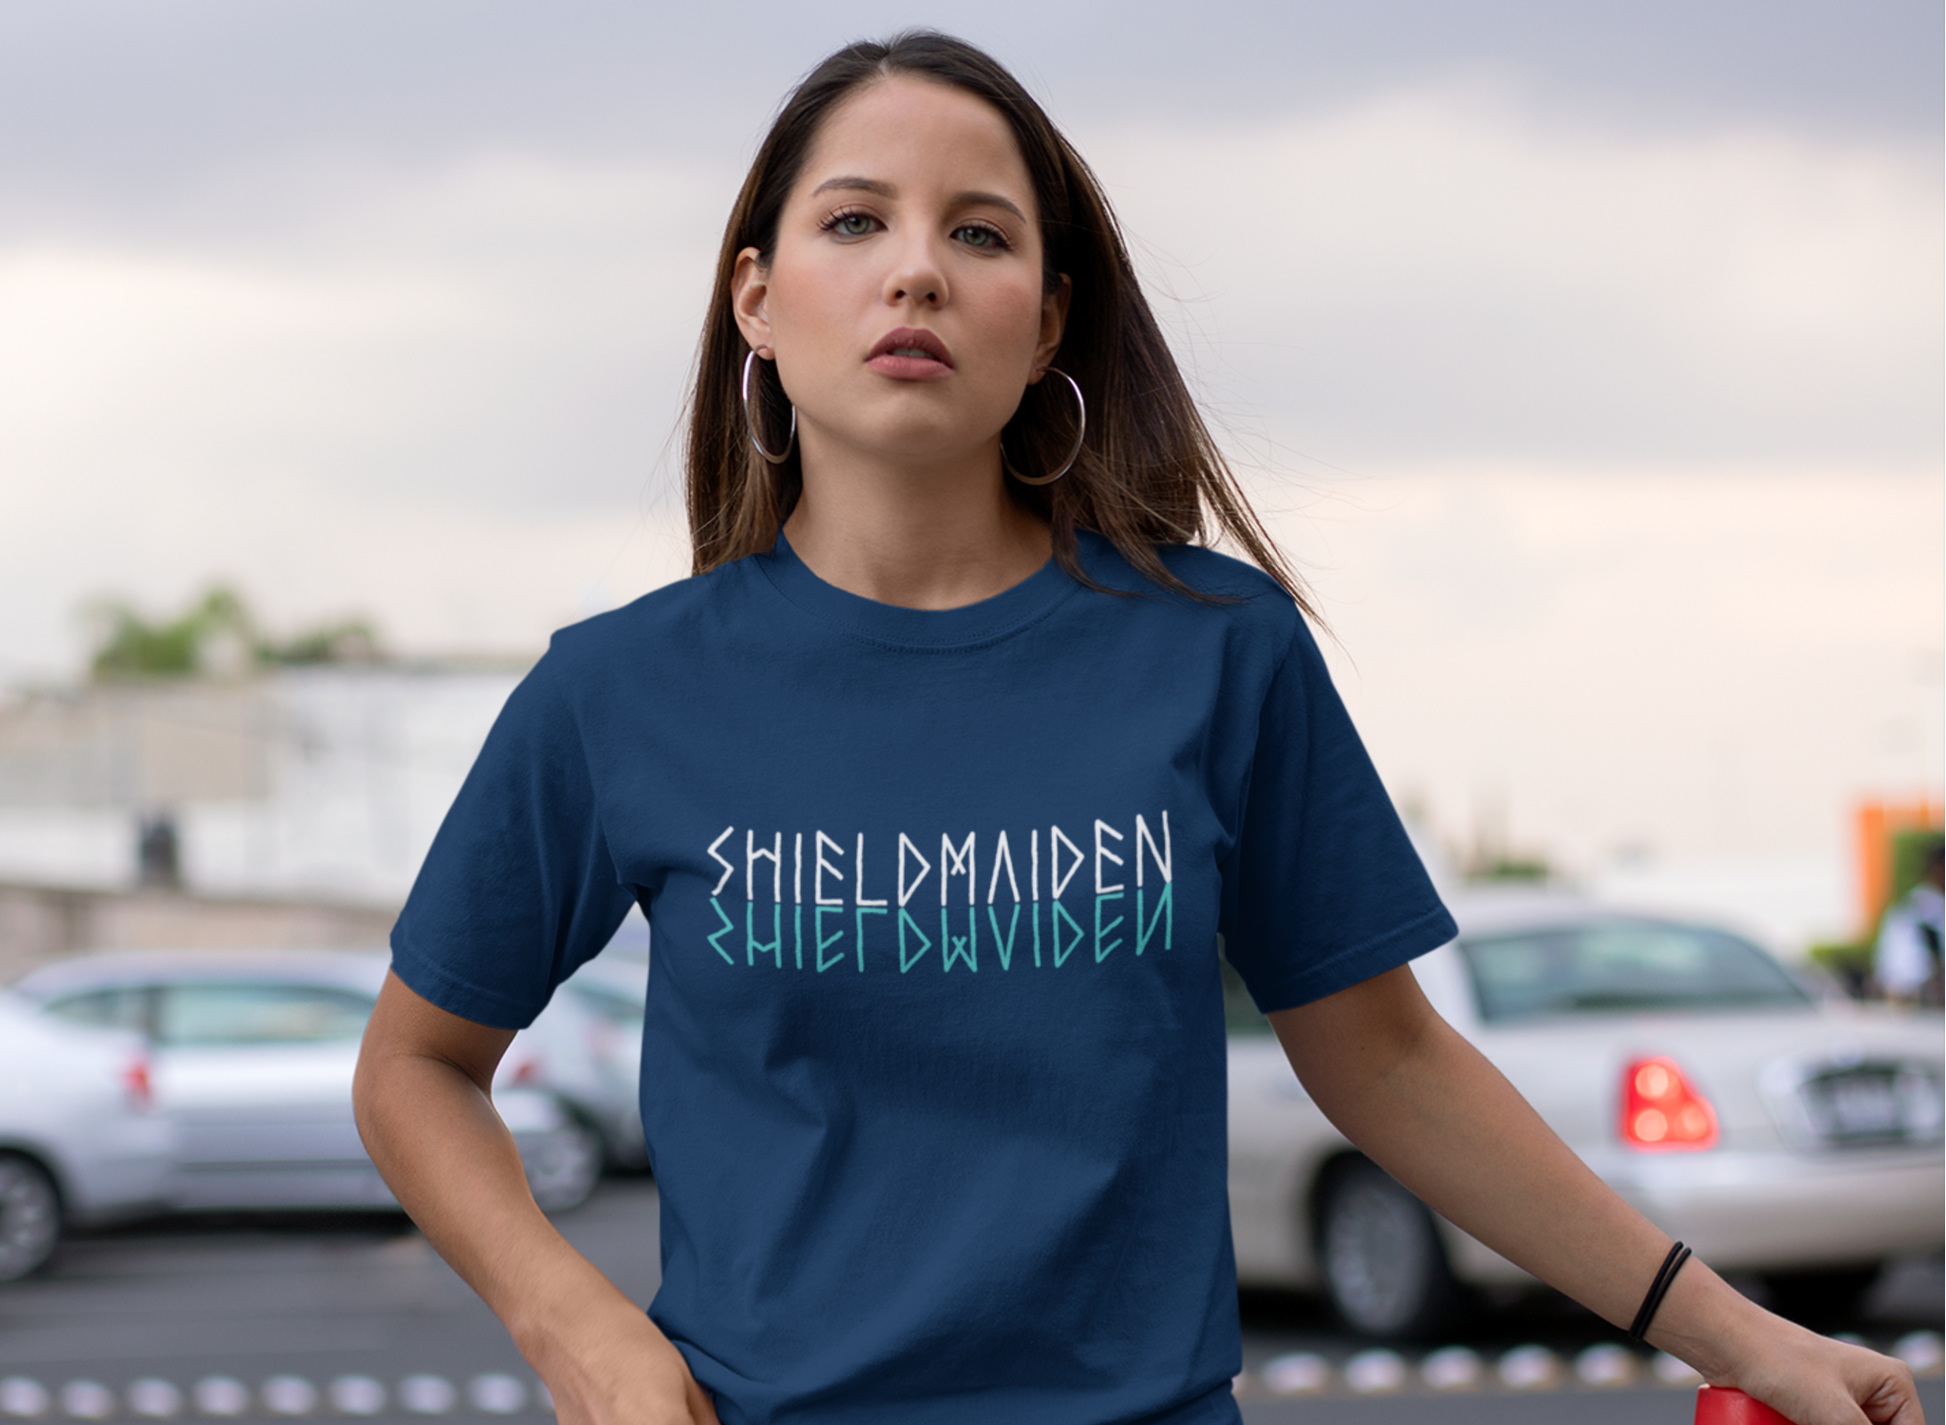 Shieldmaiden, Viking, Norse, Gym t-shirt & apparel, I'm A Shieldmaiden –  Norse By Blood